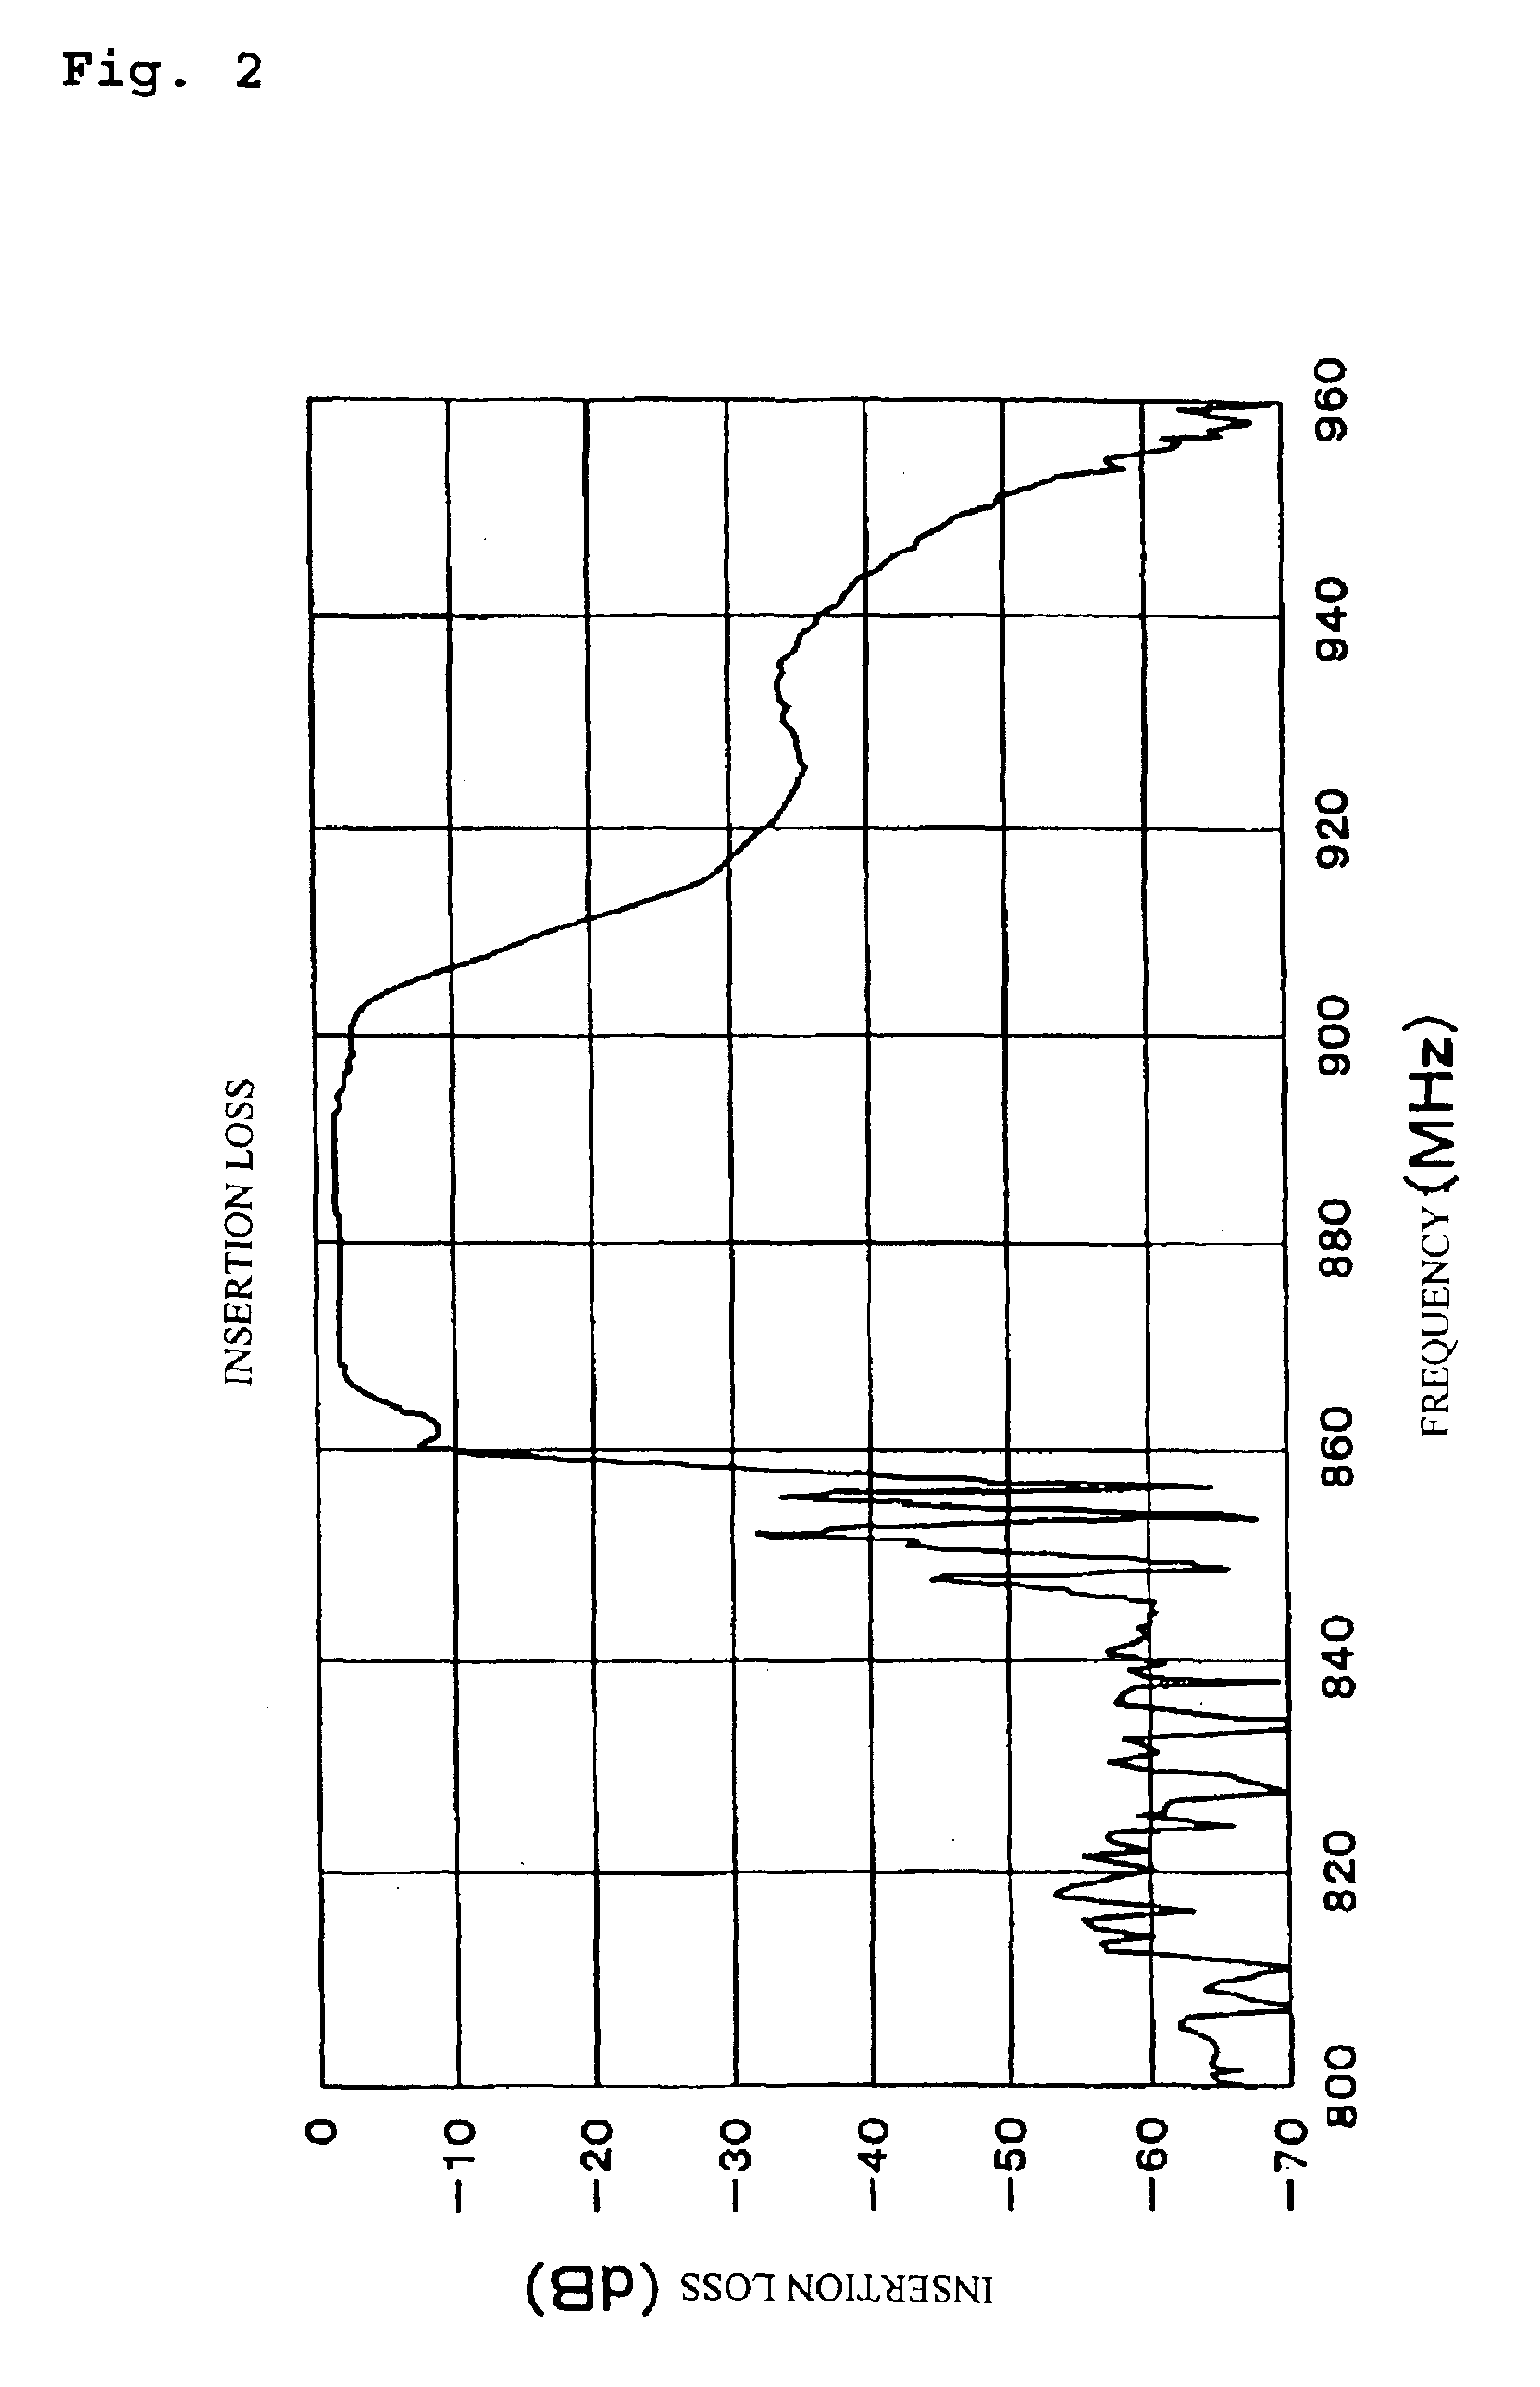 Surface acoustic wave filter apparatus having different structure reflectors